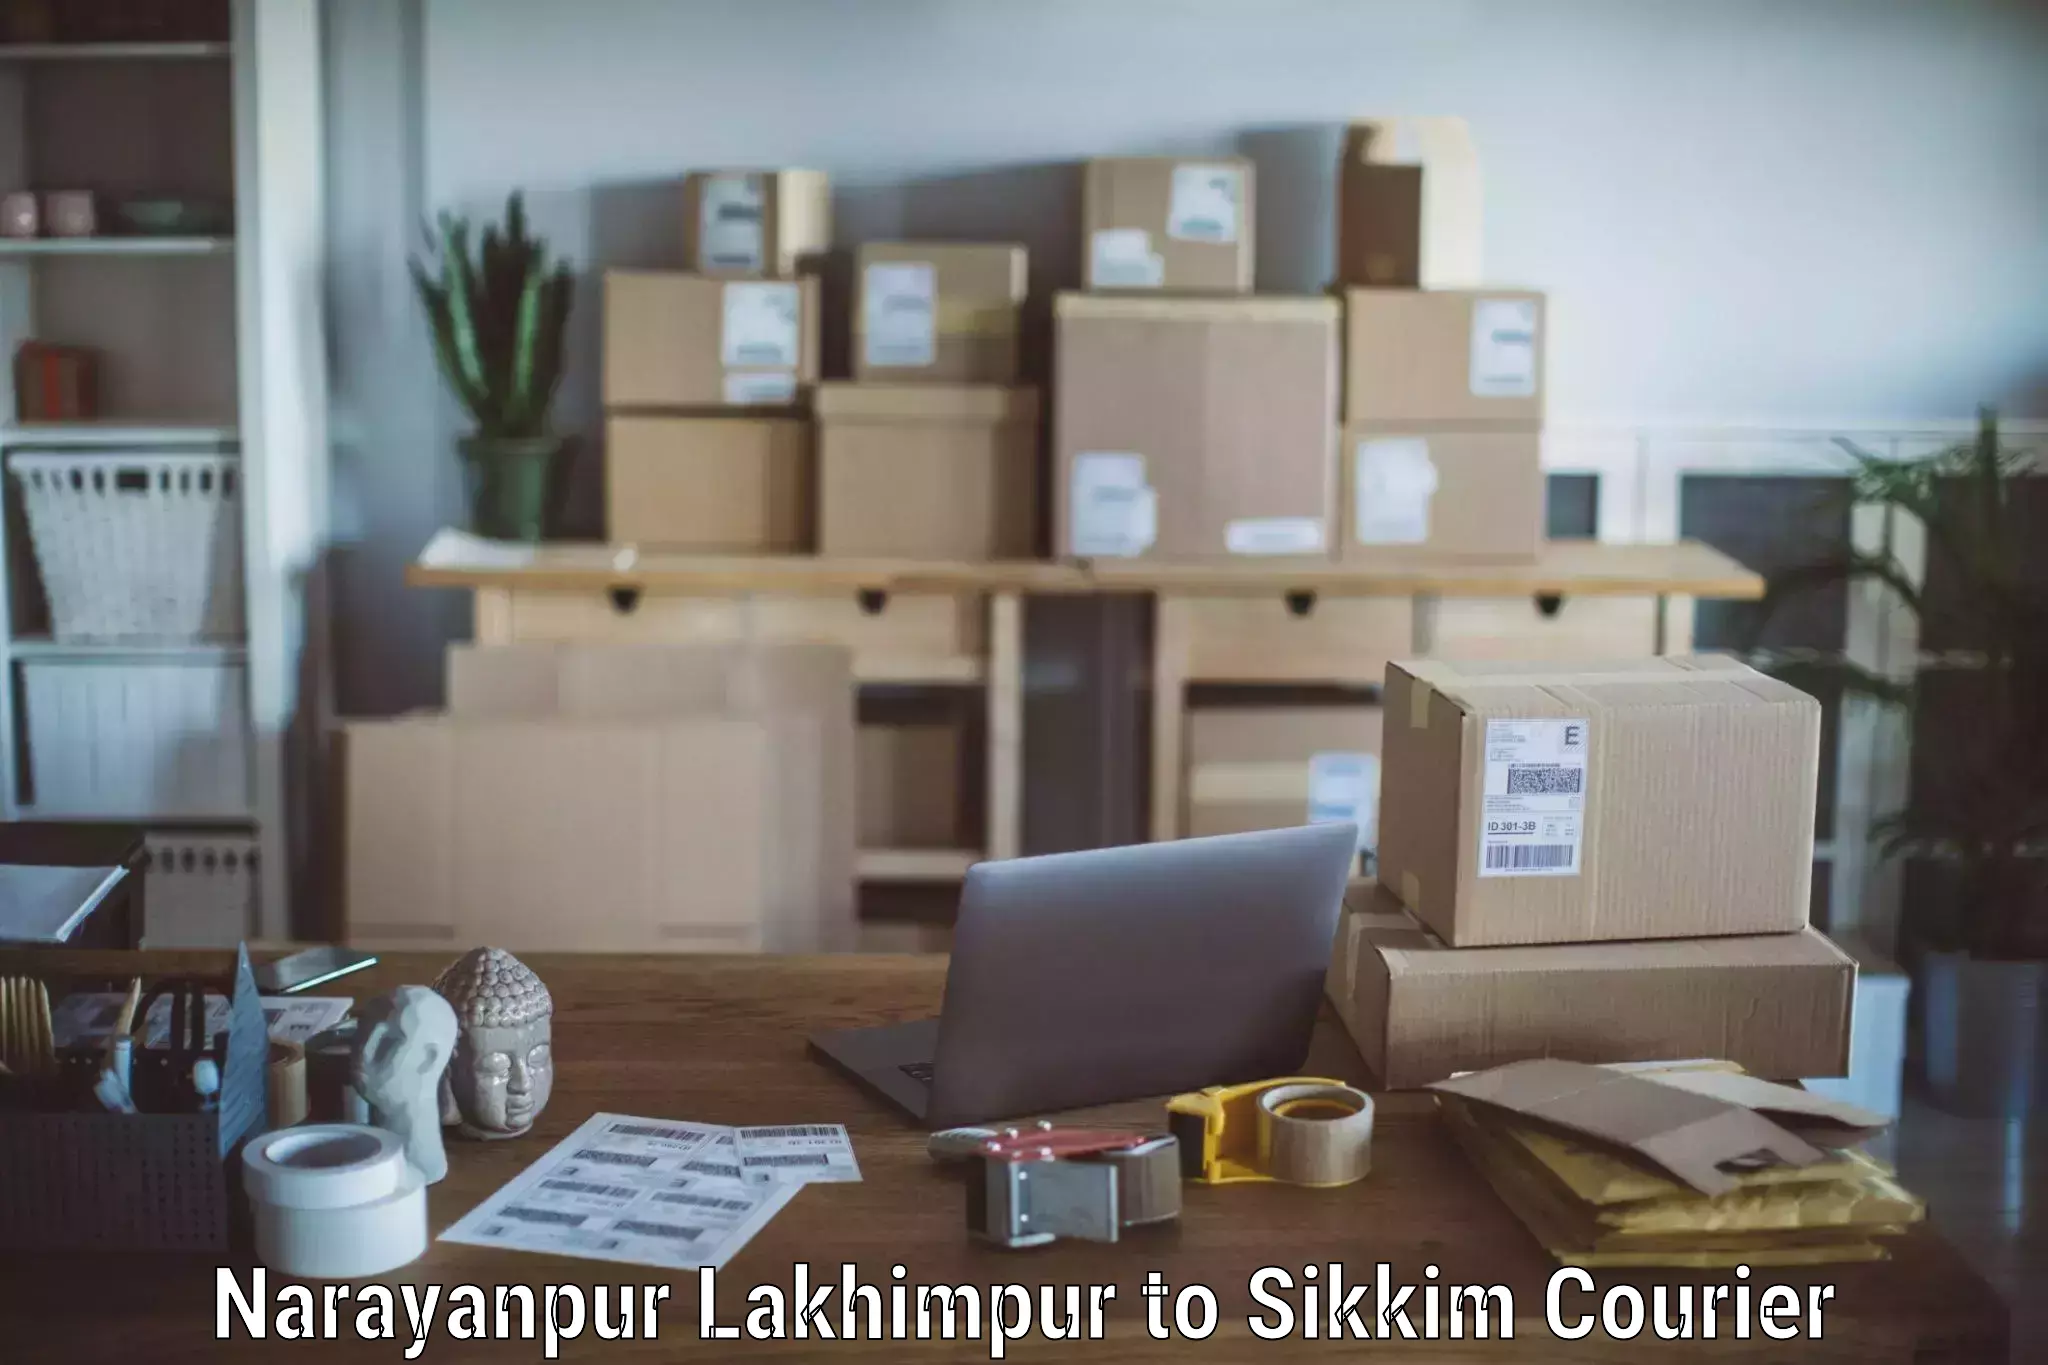 Professional relocation services Narayanpur Lakhimpur to North Sikkim